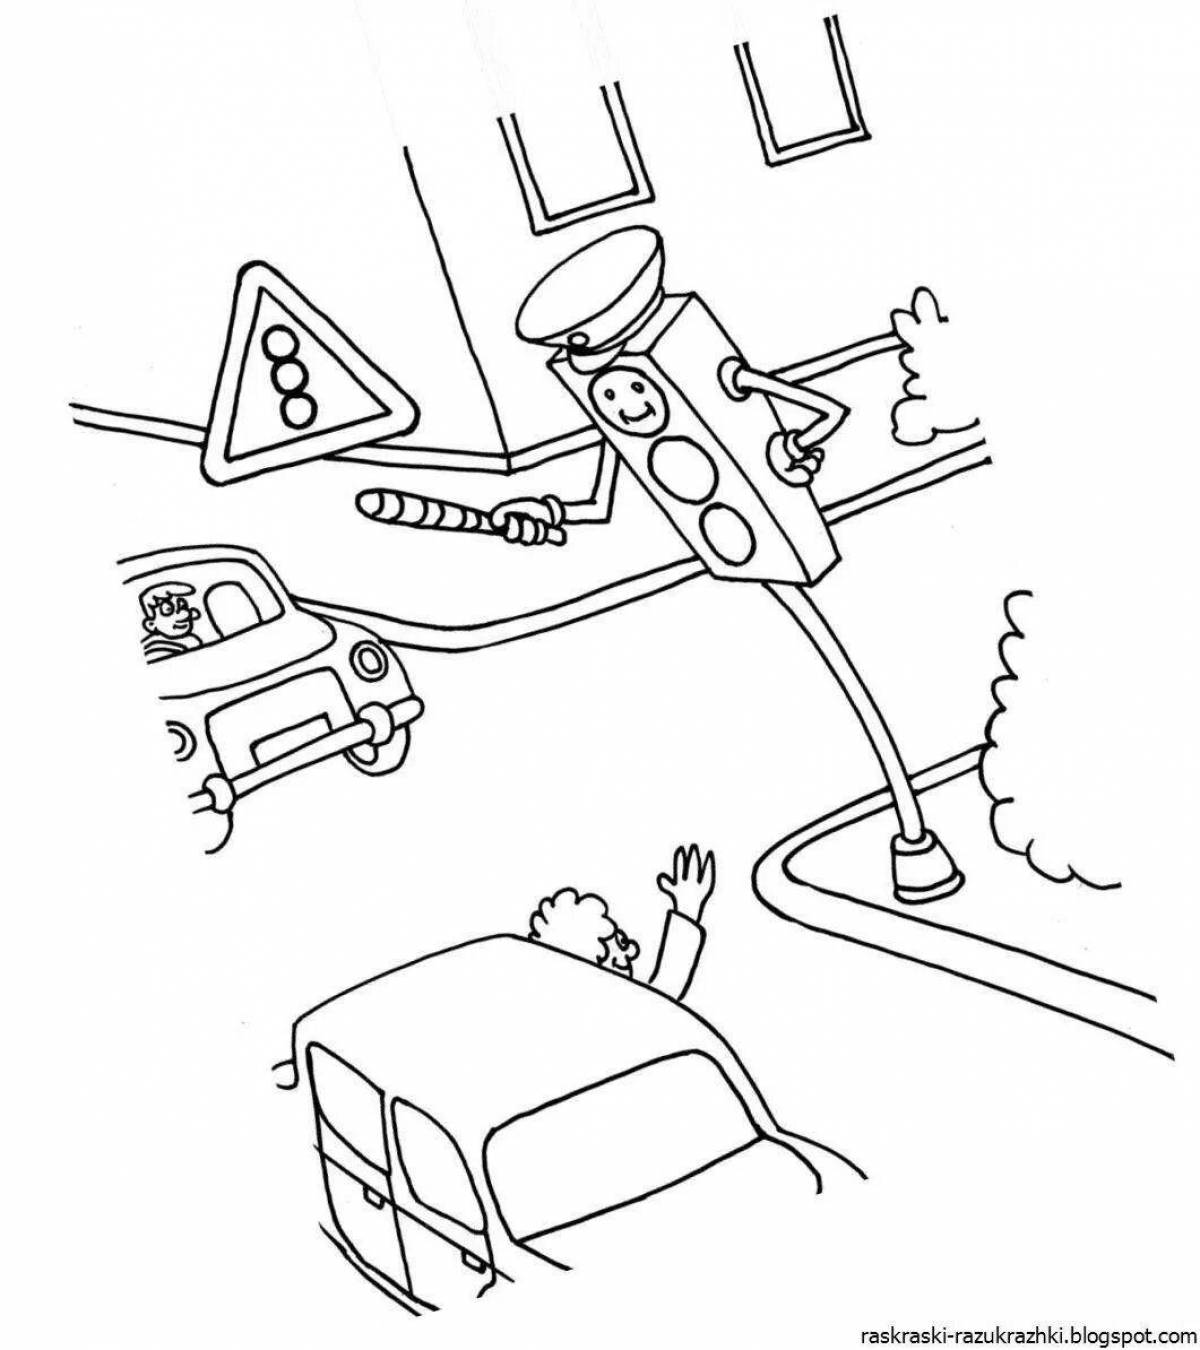 Coloring page dazzling winter road for kids